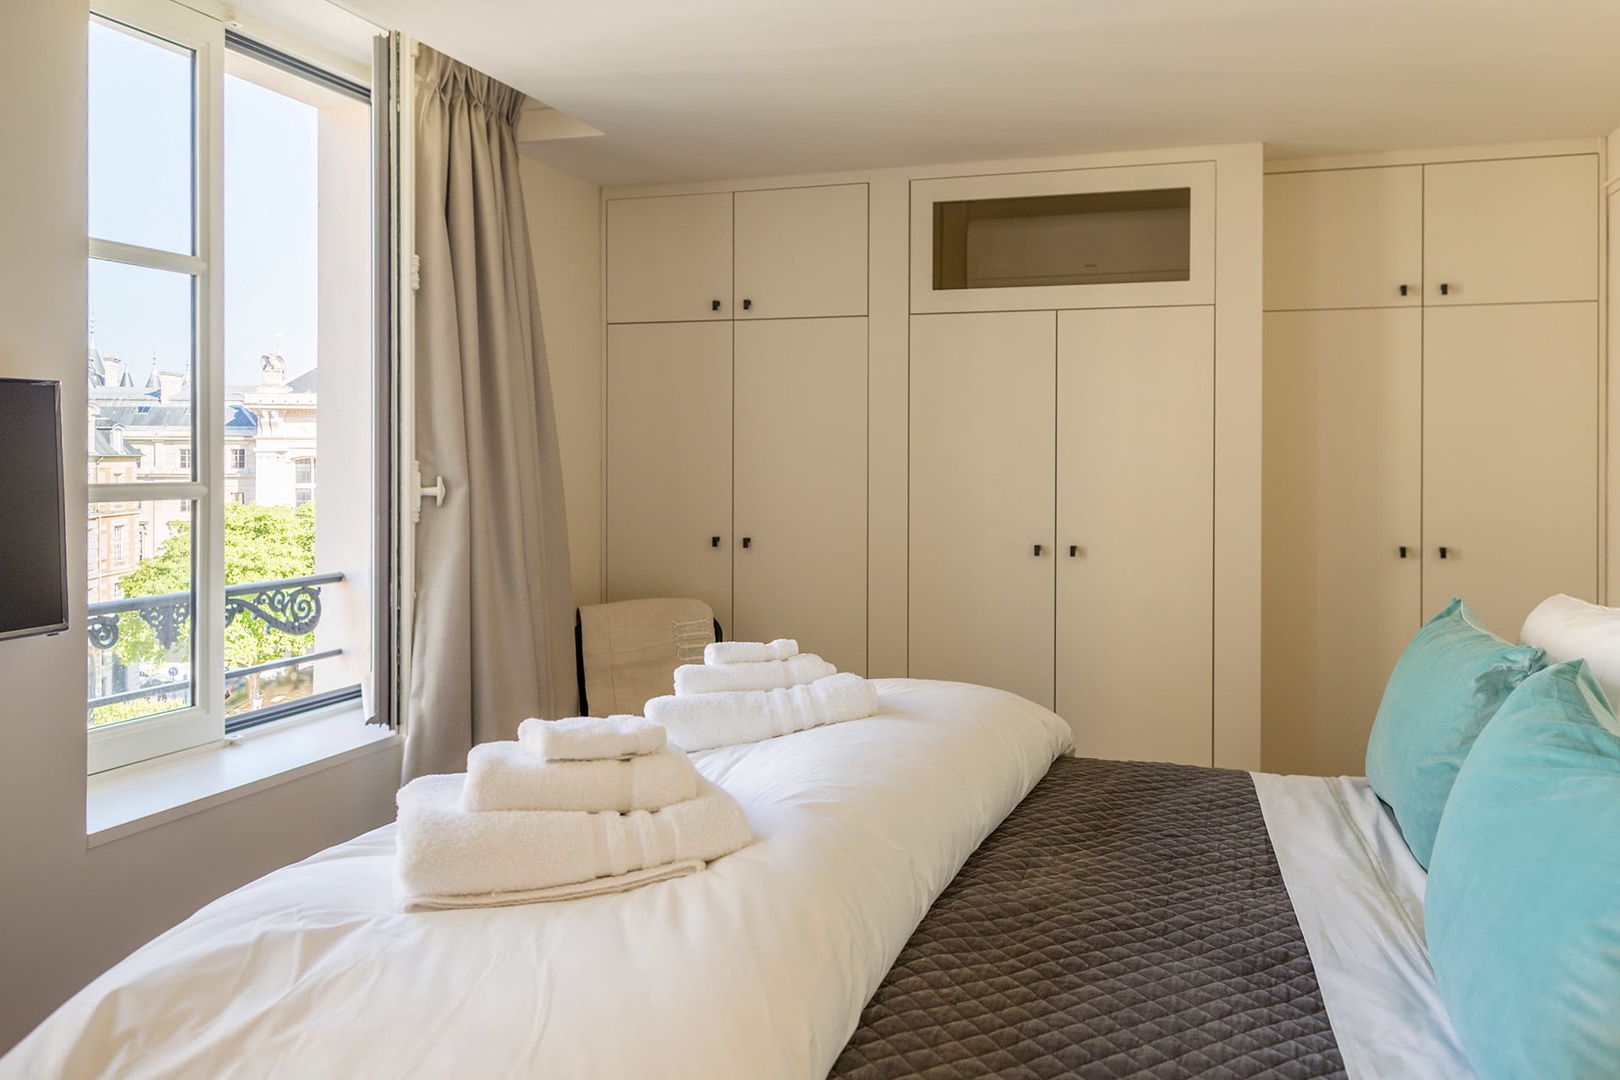 The bedroom overlooks Place Dauphine and has plenty of closets.